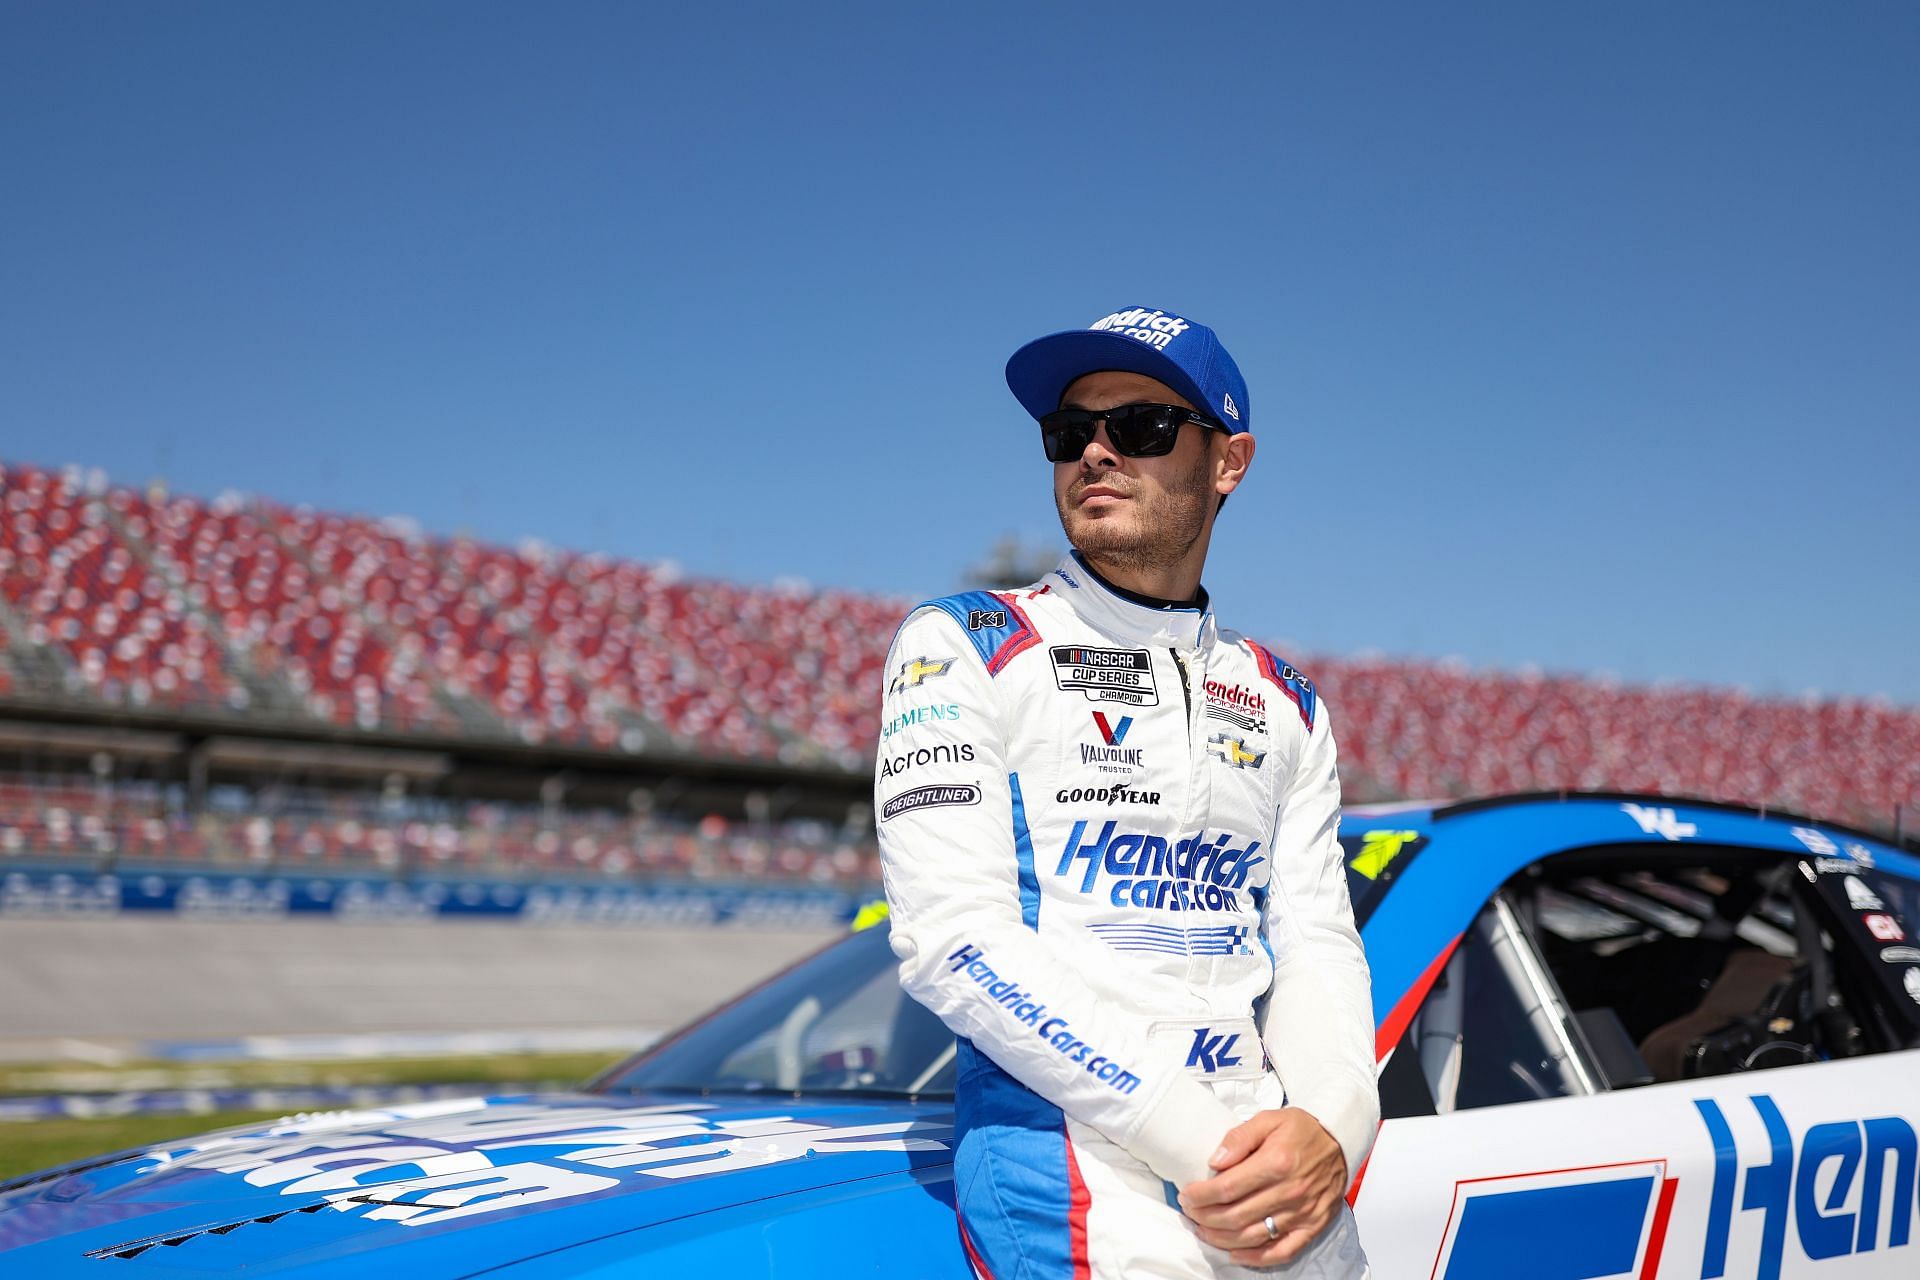 Kyle Larson looks on during qualifying for the NASCAR Cup Series GEICO 500 at Talladega Superspeedway